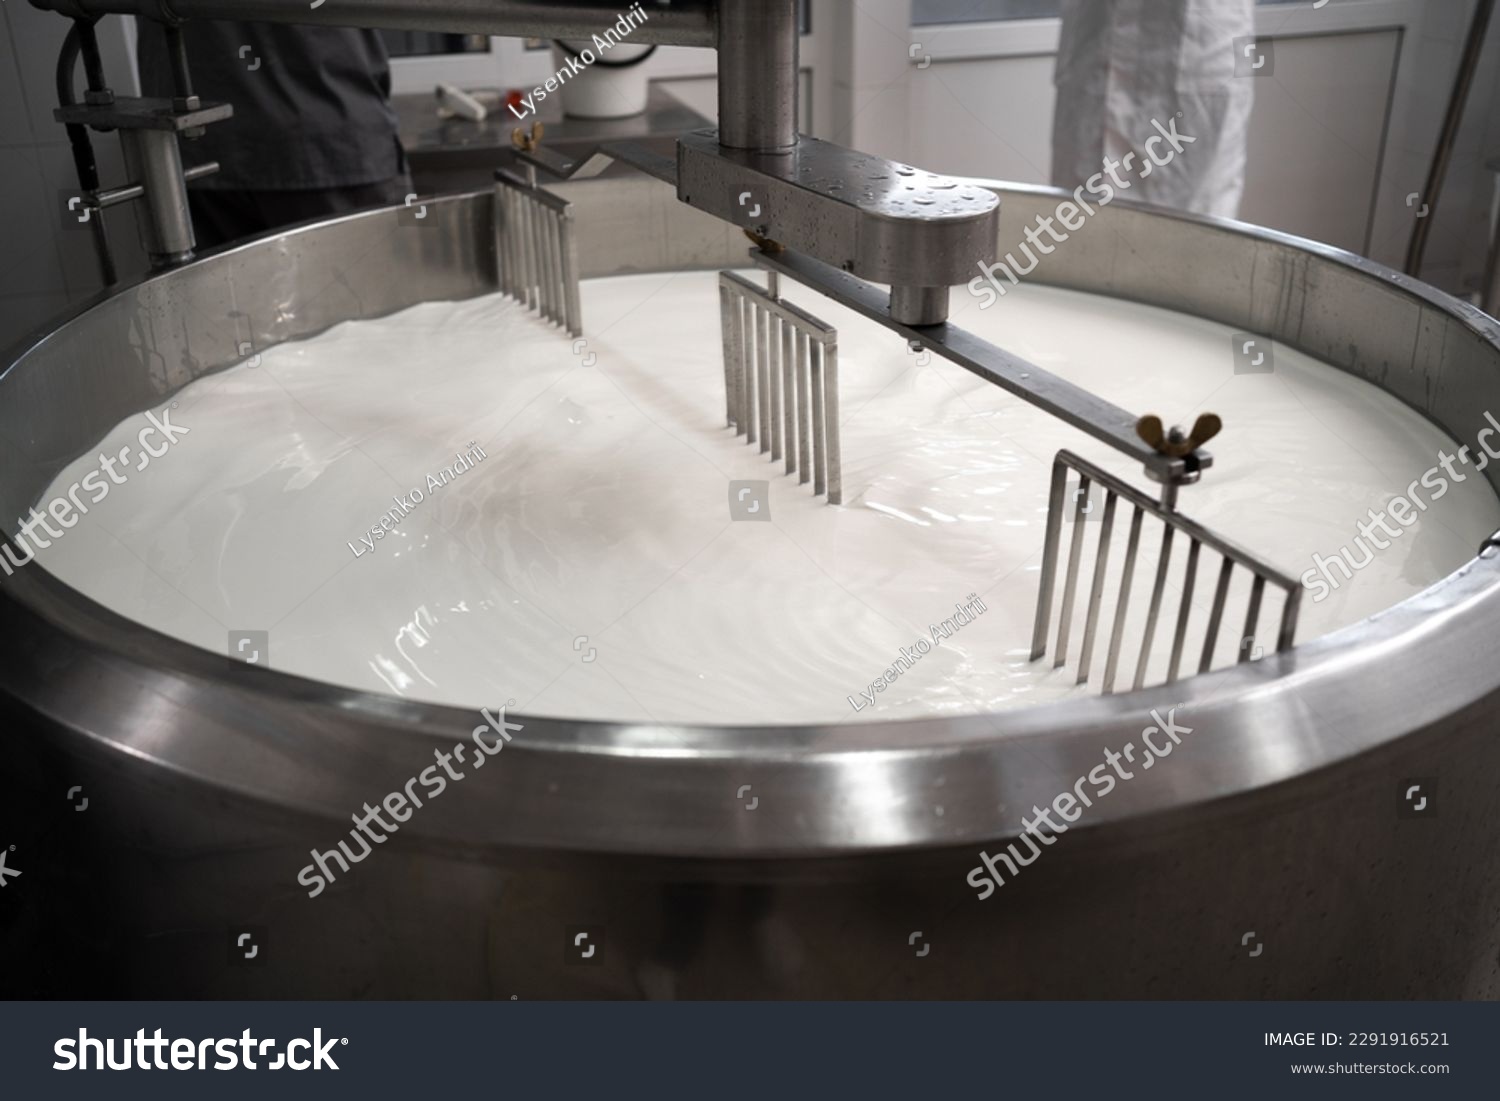 Process of making dairy products in modern dairy factory. Preparing milk for cheese, pasteurization in large tanks. Copy space #2291916521